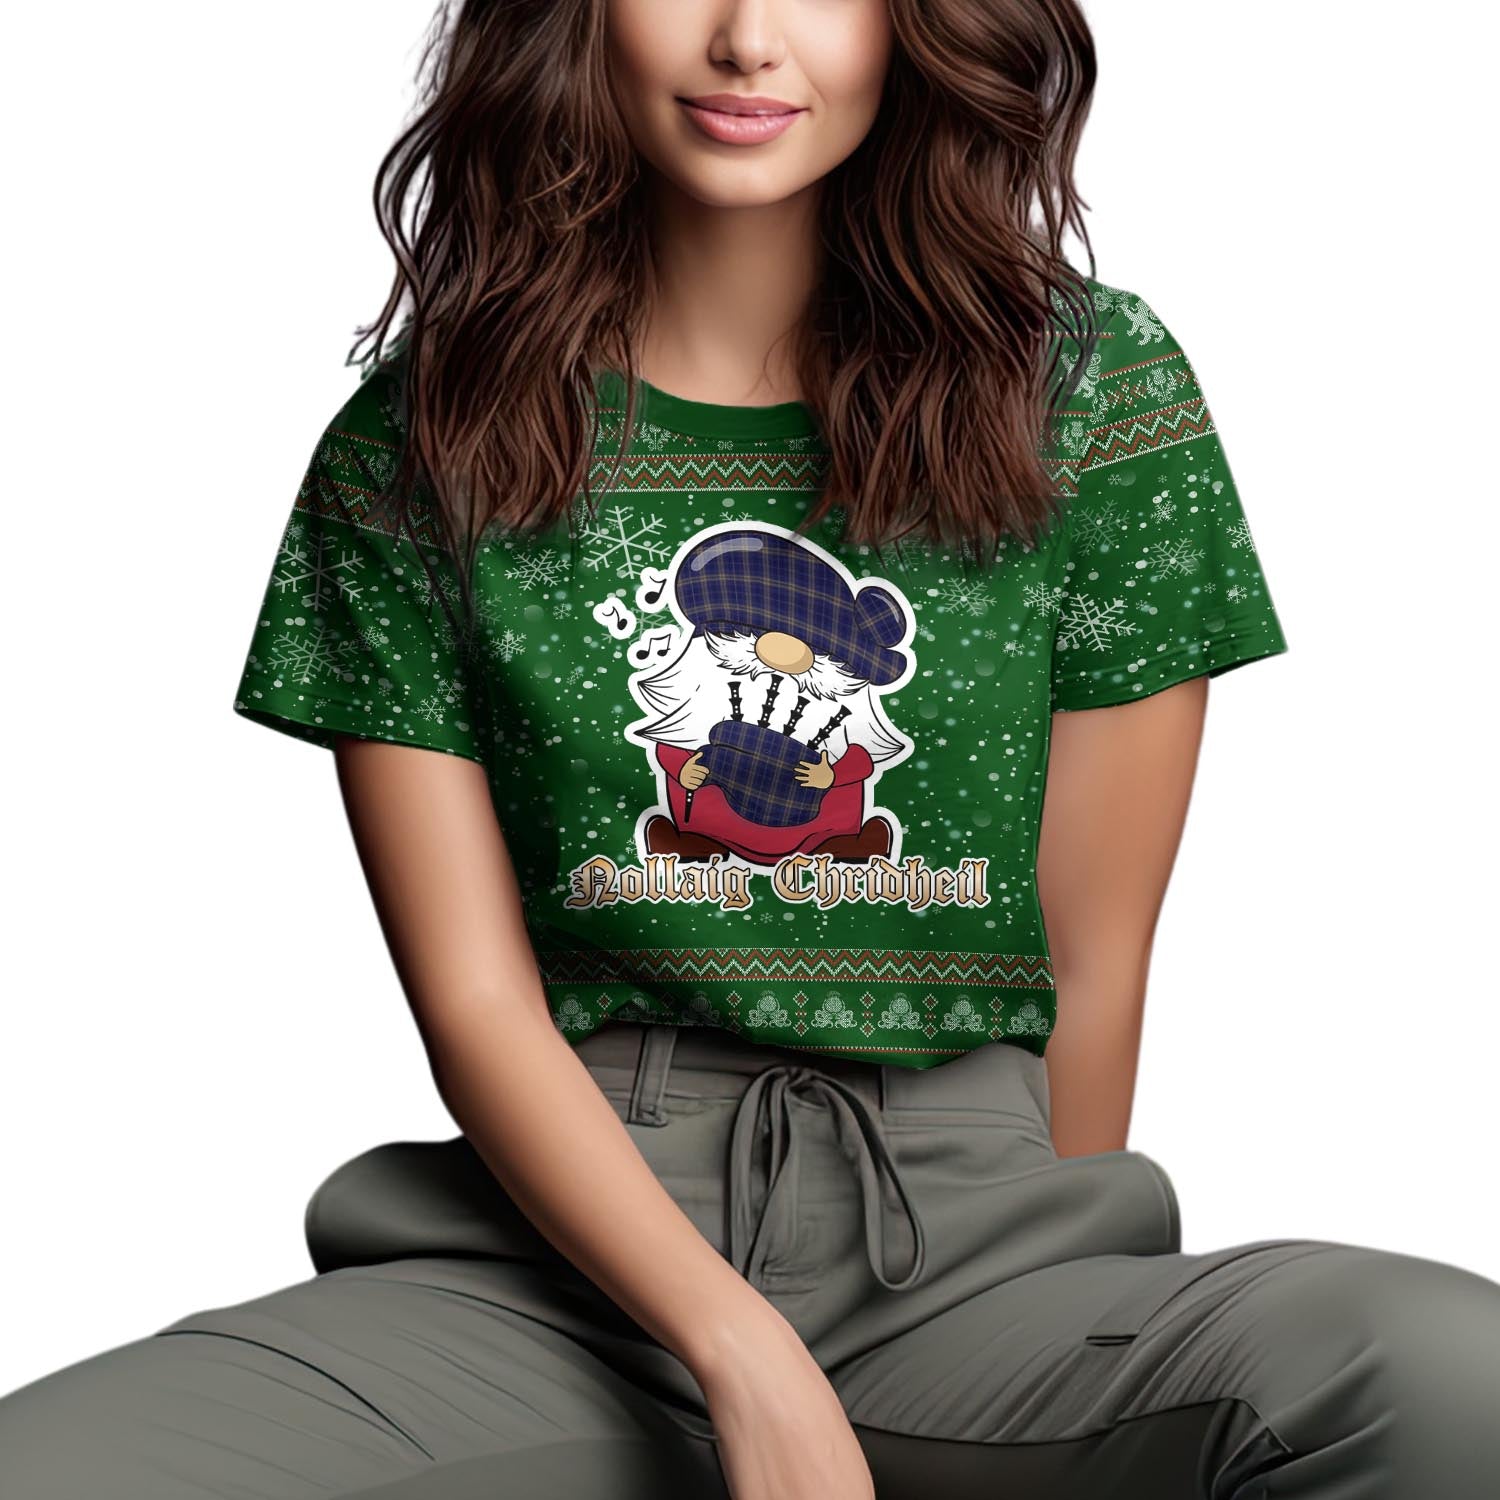 Rhys of Wales Clan Christmas Family T-Shirt with Funny Gnome Playing Bagpipes Women's Shirt Green - Tartanvibesclothing